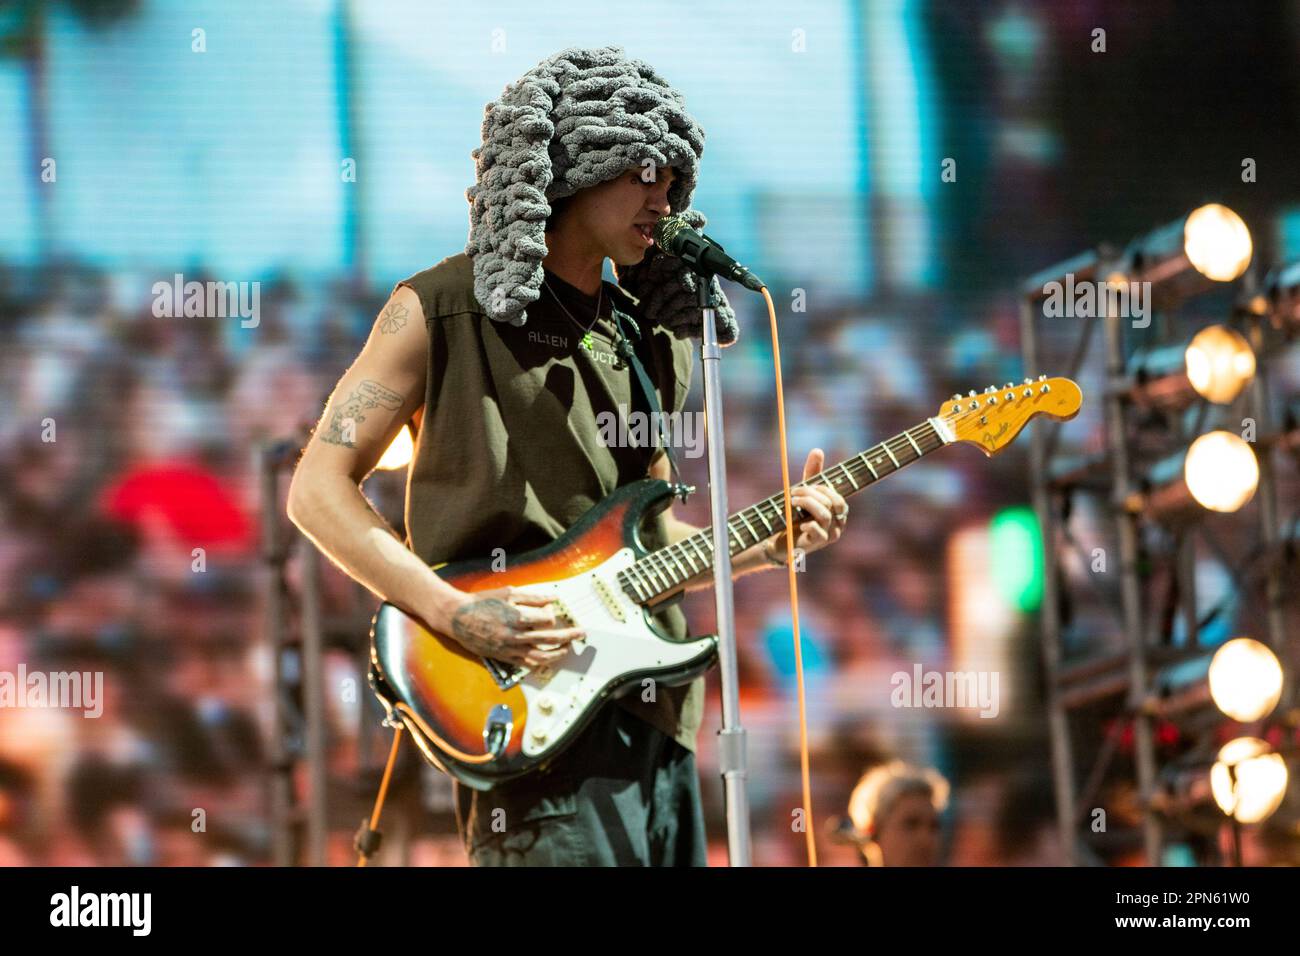 Dominic Fike performs at the Coachella Music & Arts Festival at the